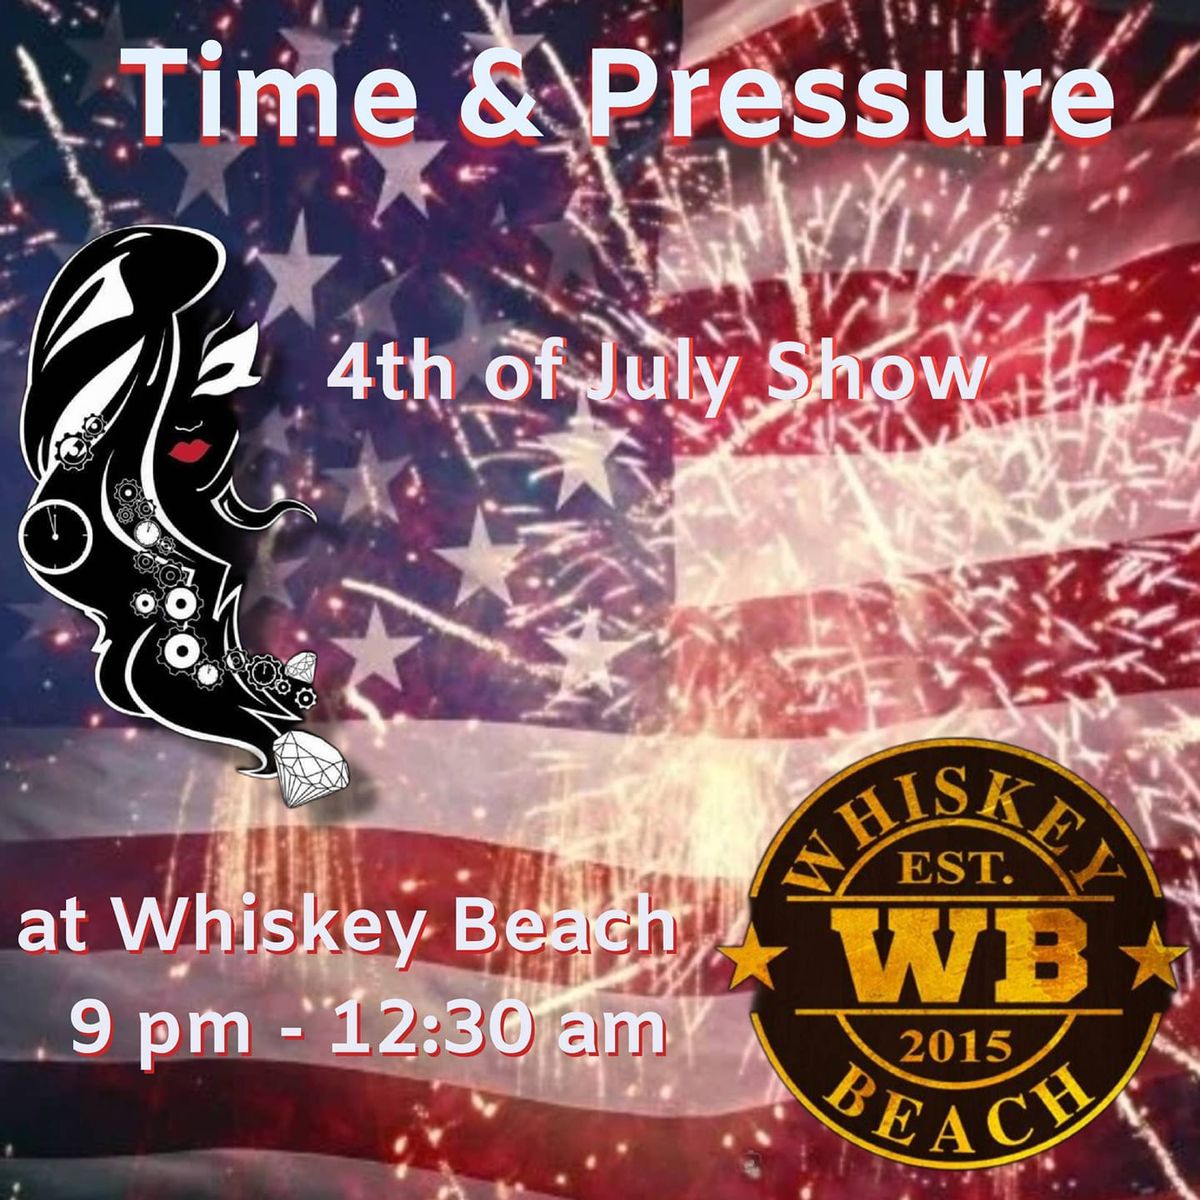 Time & Pressure 4th if July Show at Whiskey Beach Bar & Grill